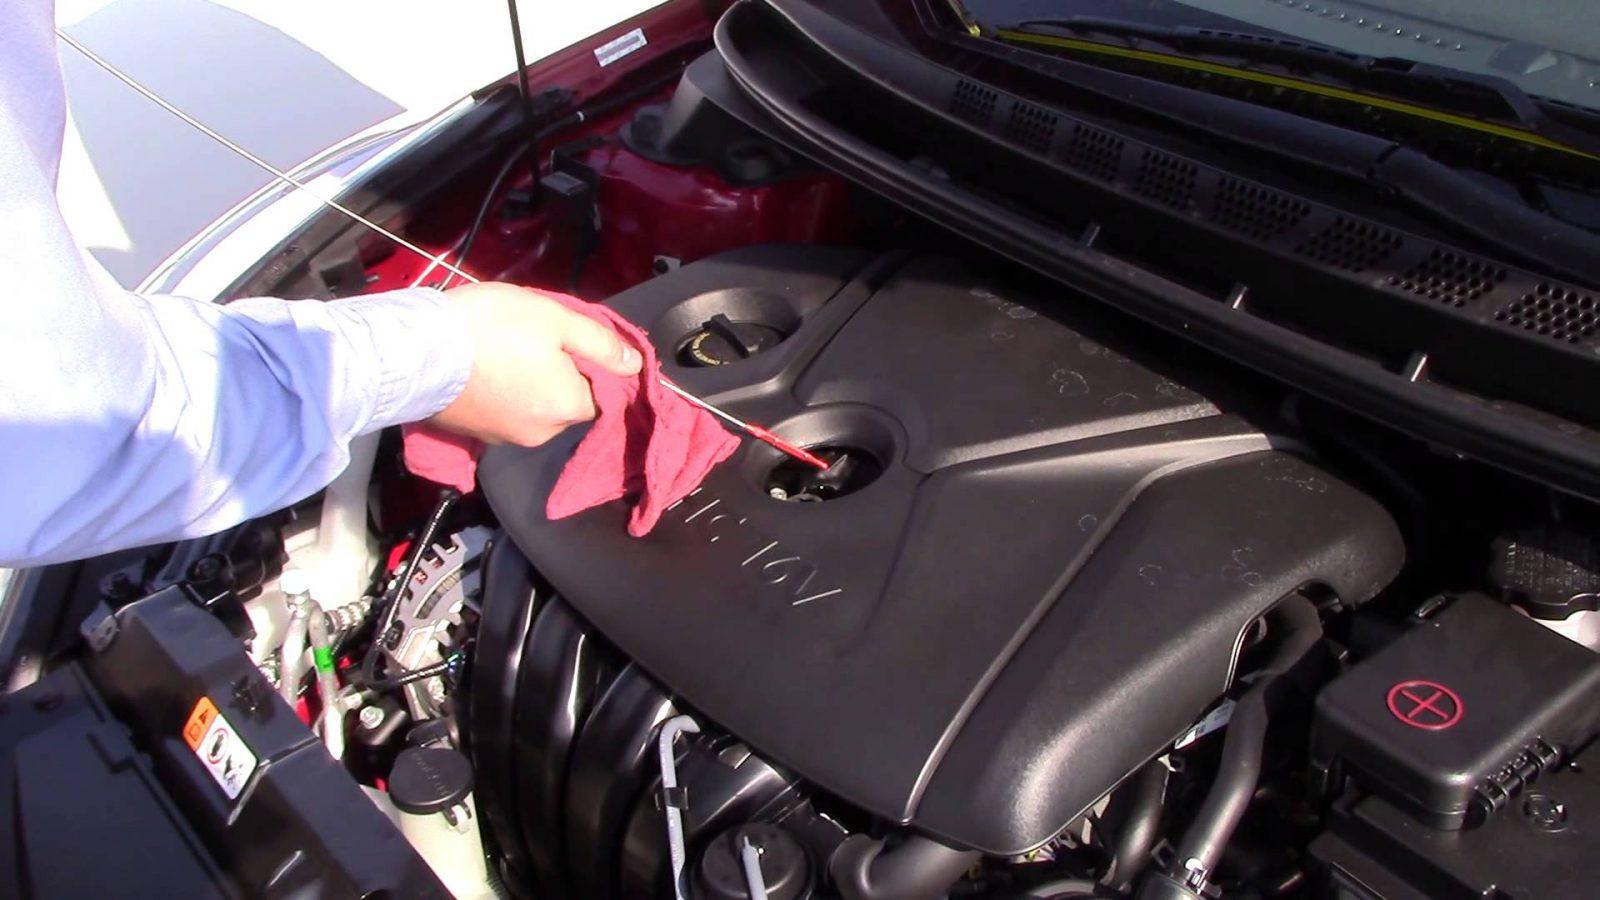 check automatic transmission fluid